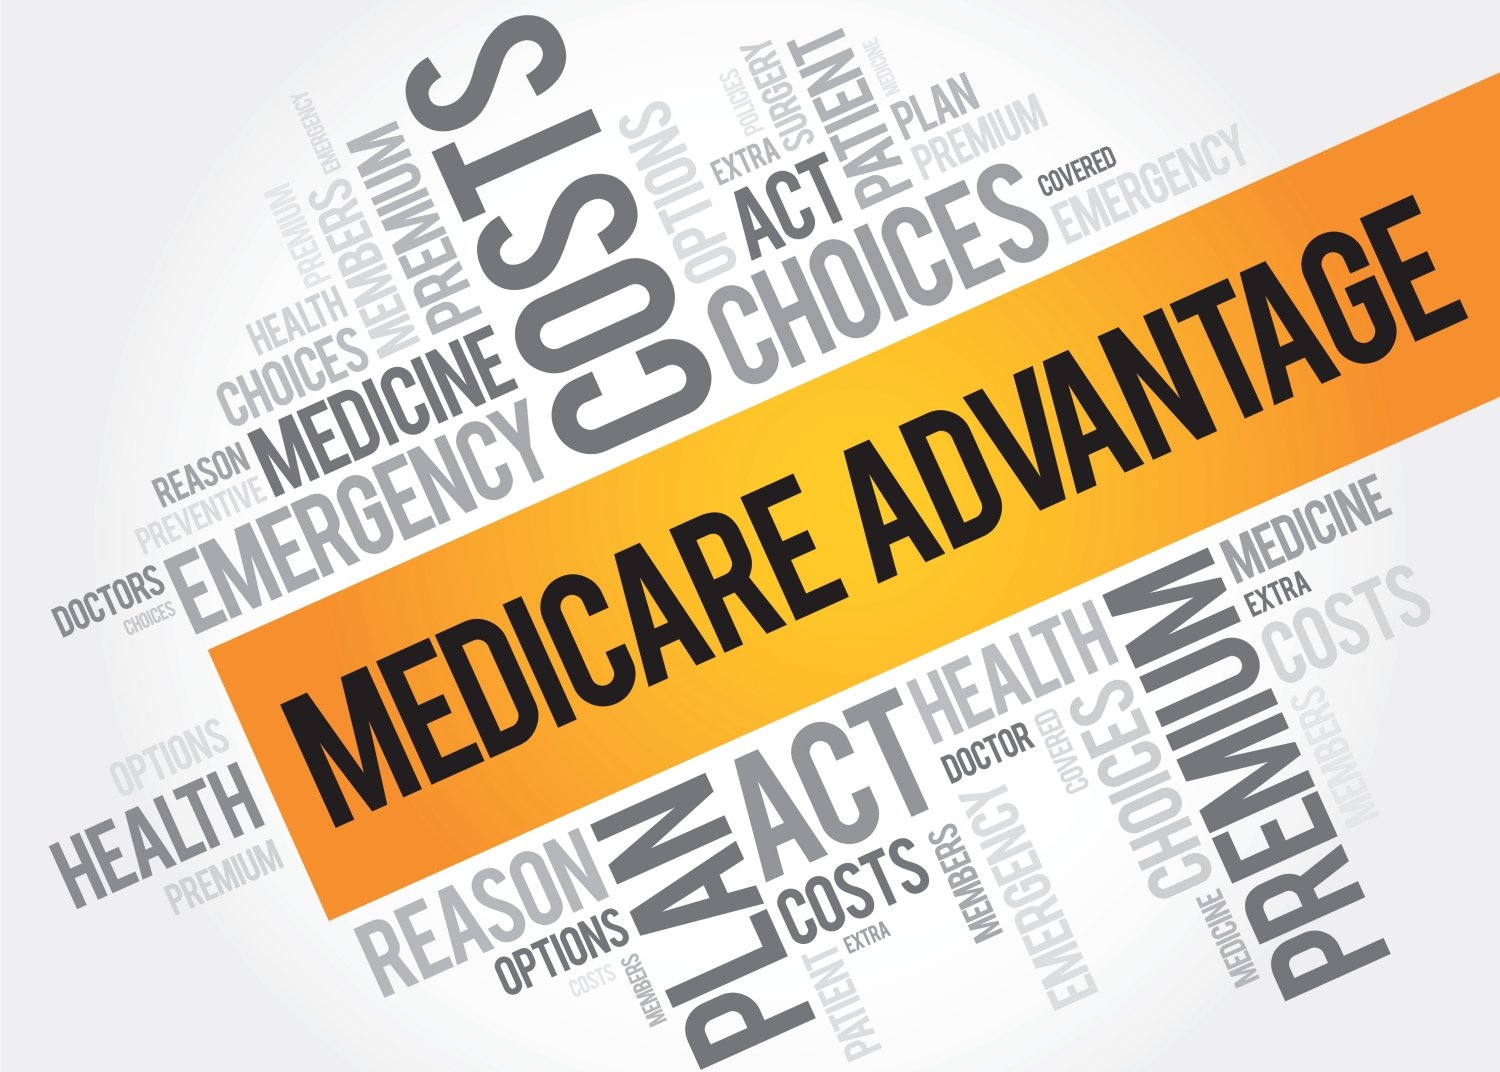  Improve Member Satisfaction and Reimbursement with High  Medicare Star Ratings    Contact Us   